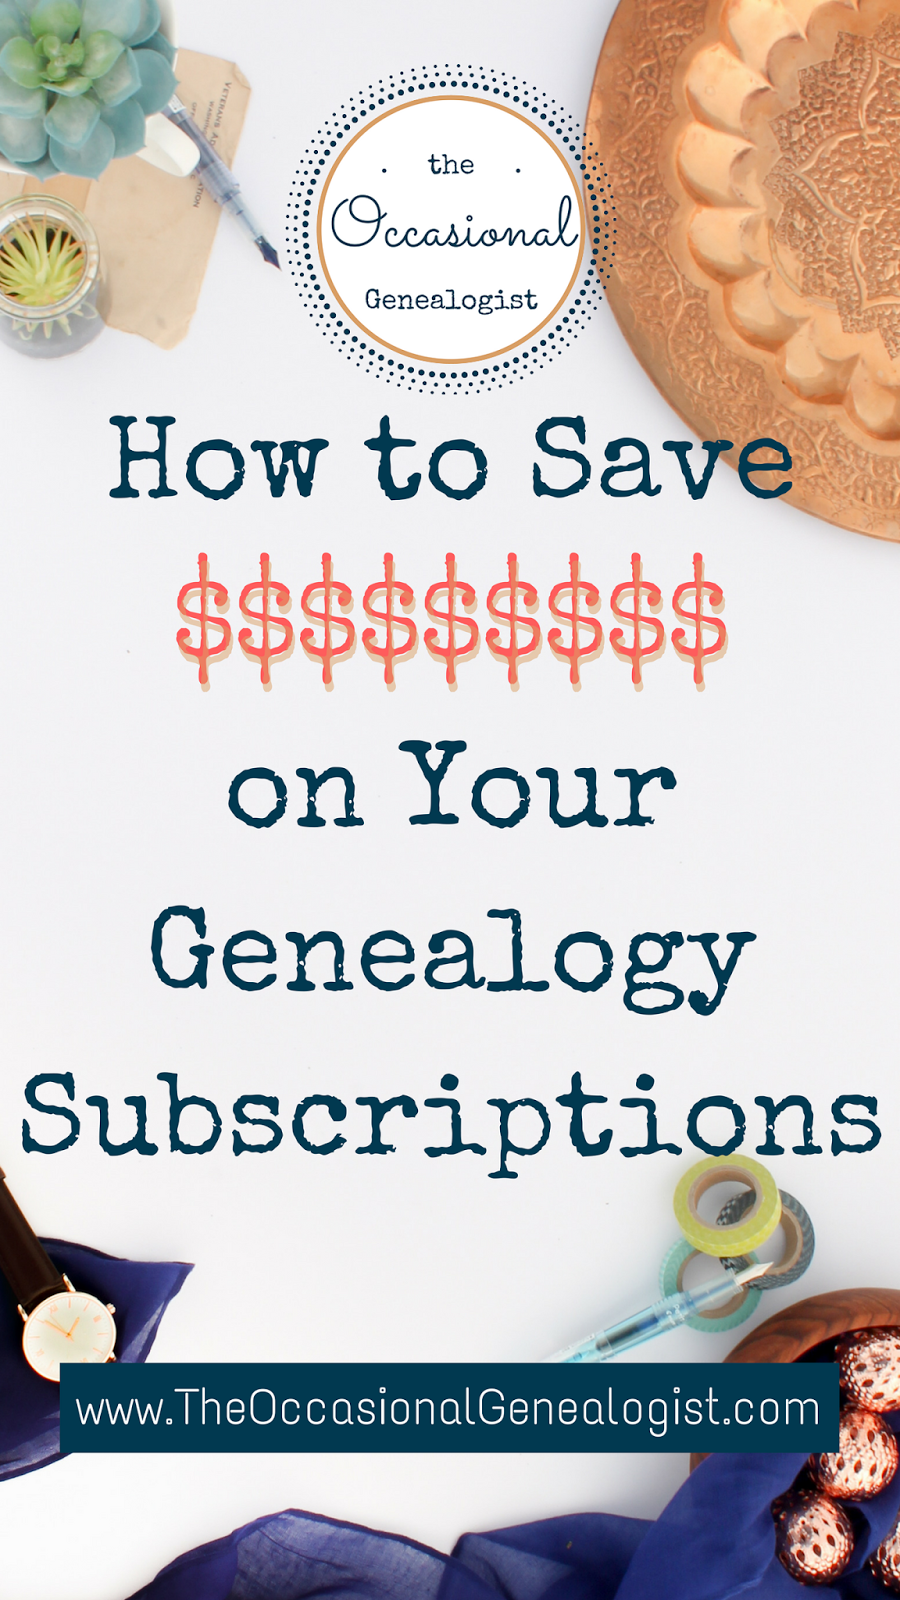 How to save money on your genealogy subscriptions from The Occasional Genealogist.